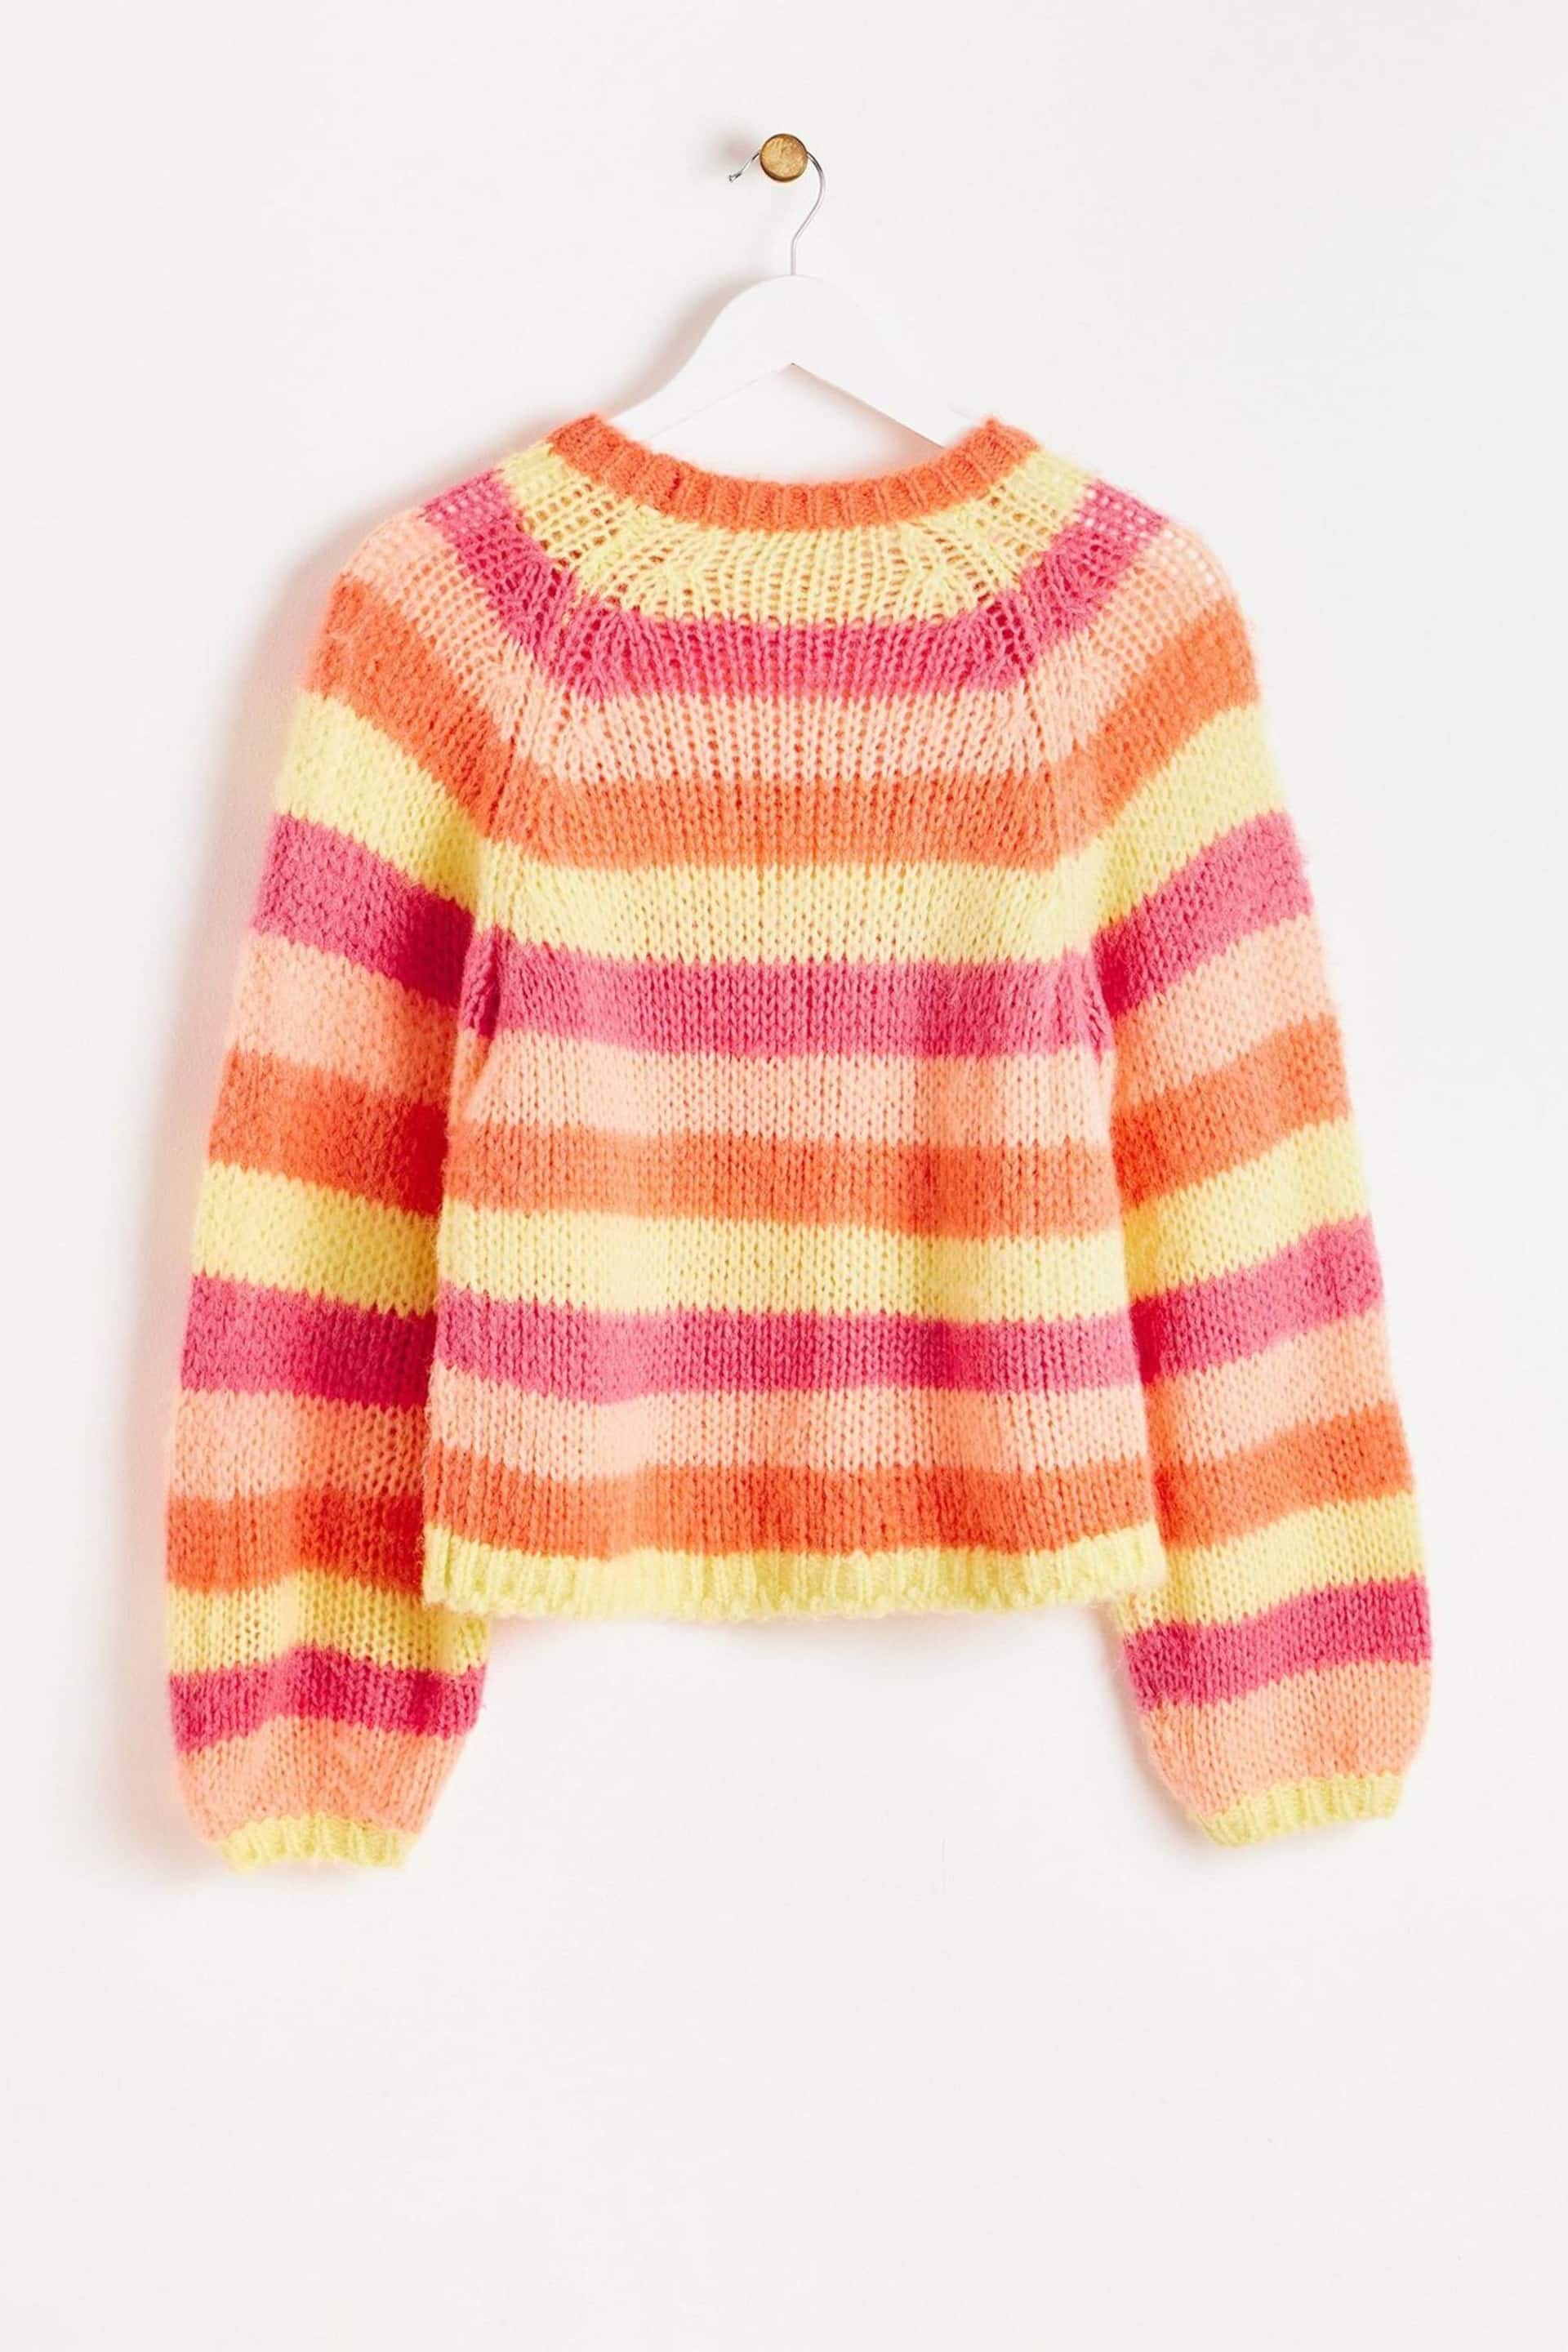 Oliver Bonas Multi Striped Lofty Knitted Jumper - Image 5 of 8